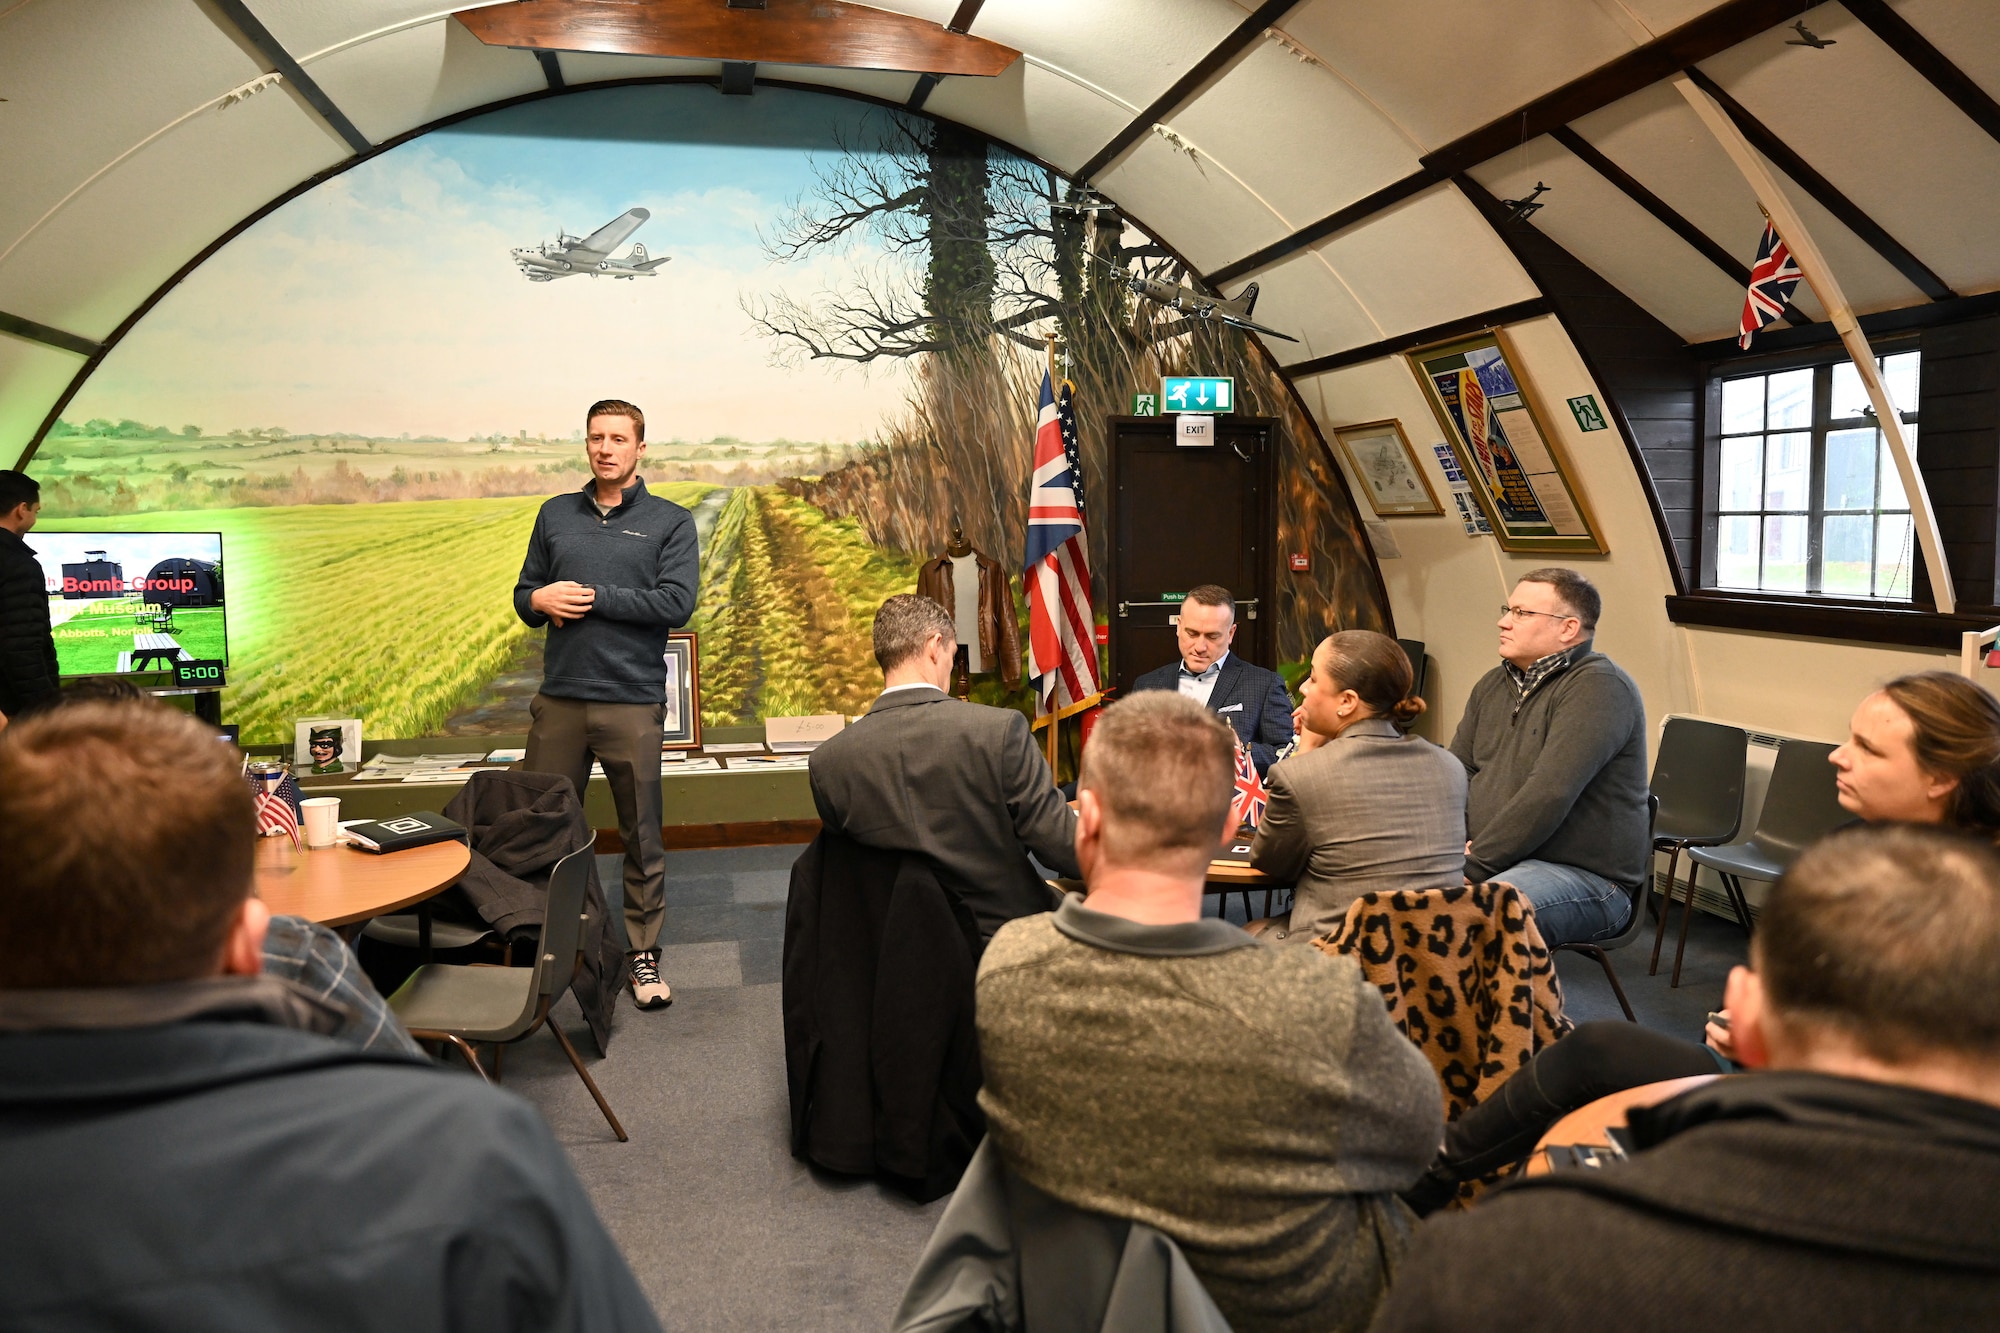 U.S. Air Force Col. Ryan Garlow, 100th Air Refueling Wing commander, discusses strategic initiatives with commanders and senior leaders at the 100th Bomb Group Memorial Museum, Thorpe Abbotts, Norfolk, England, Dec. 4, 2023. Base leadership from Royal Air Force Mildenhall spent time at the museum for an off-site meeting, followed by a tour to learn more about the heritage of the 100th ARW. (U.S. Air Force photo by Karen Abeyasekere)